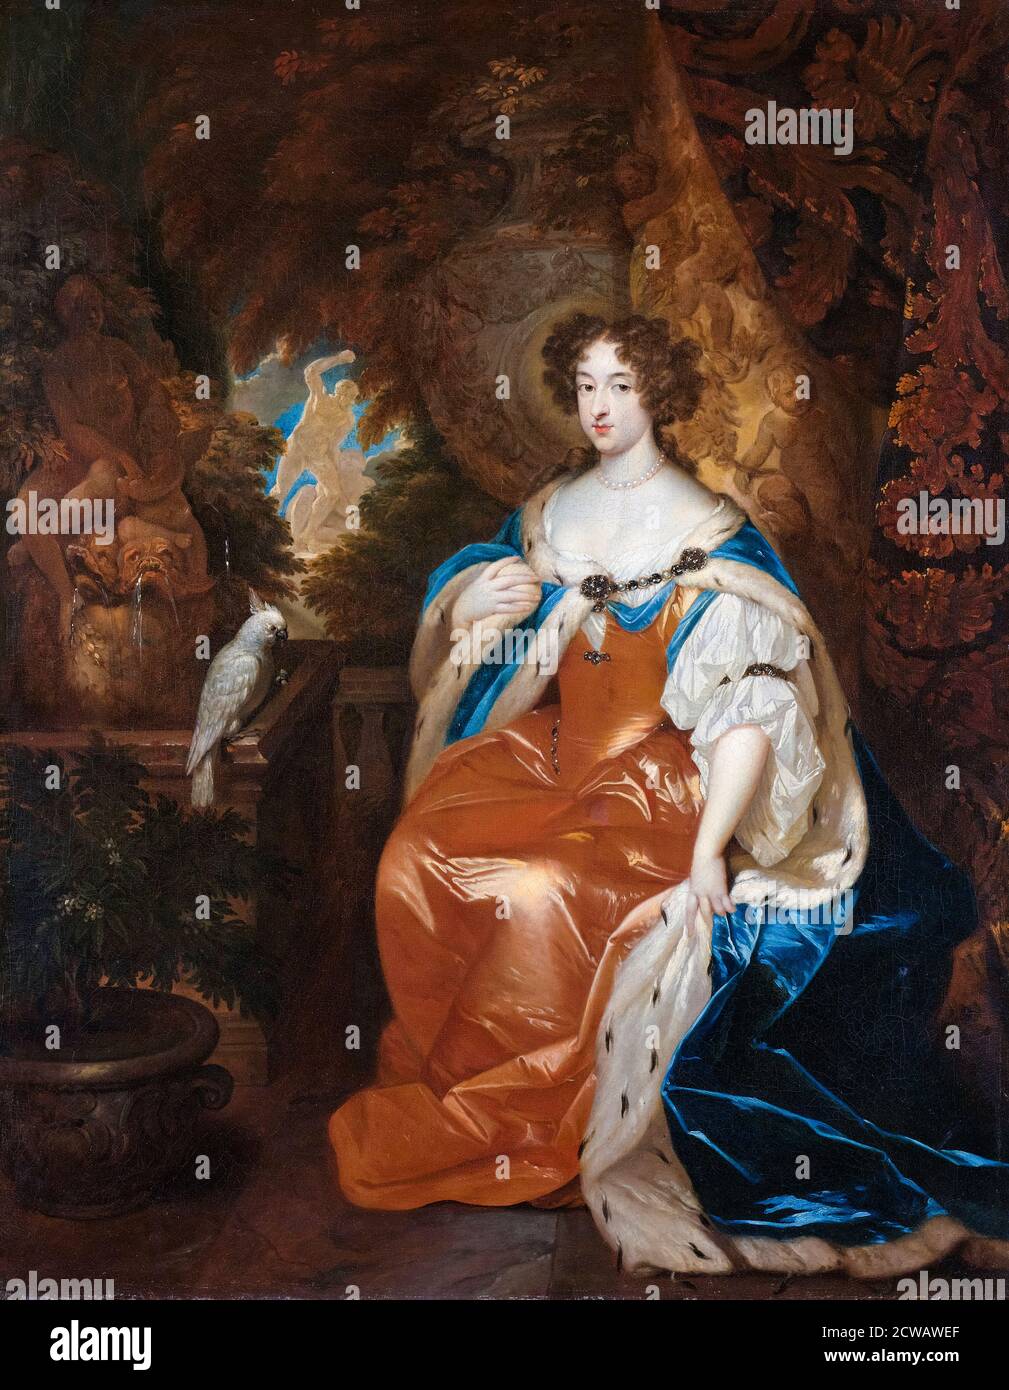 Mary Stuart (1662-1694) (Mary II of England), Queen of England Scotland and Ireland, portrait painting by Caspar Netscher, circa 1683 Stock Photo